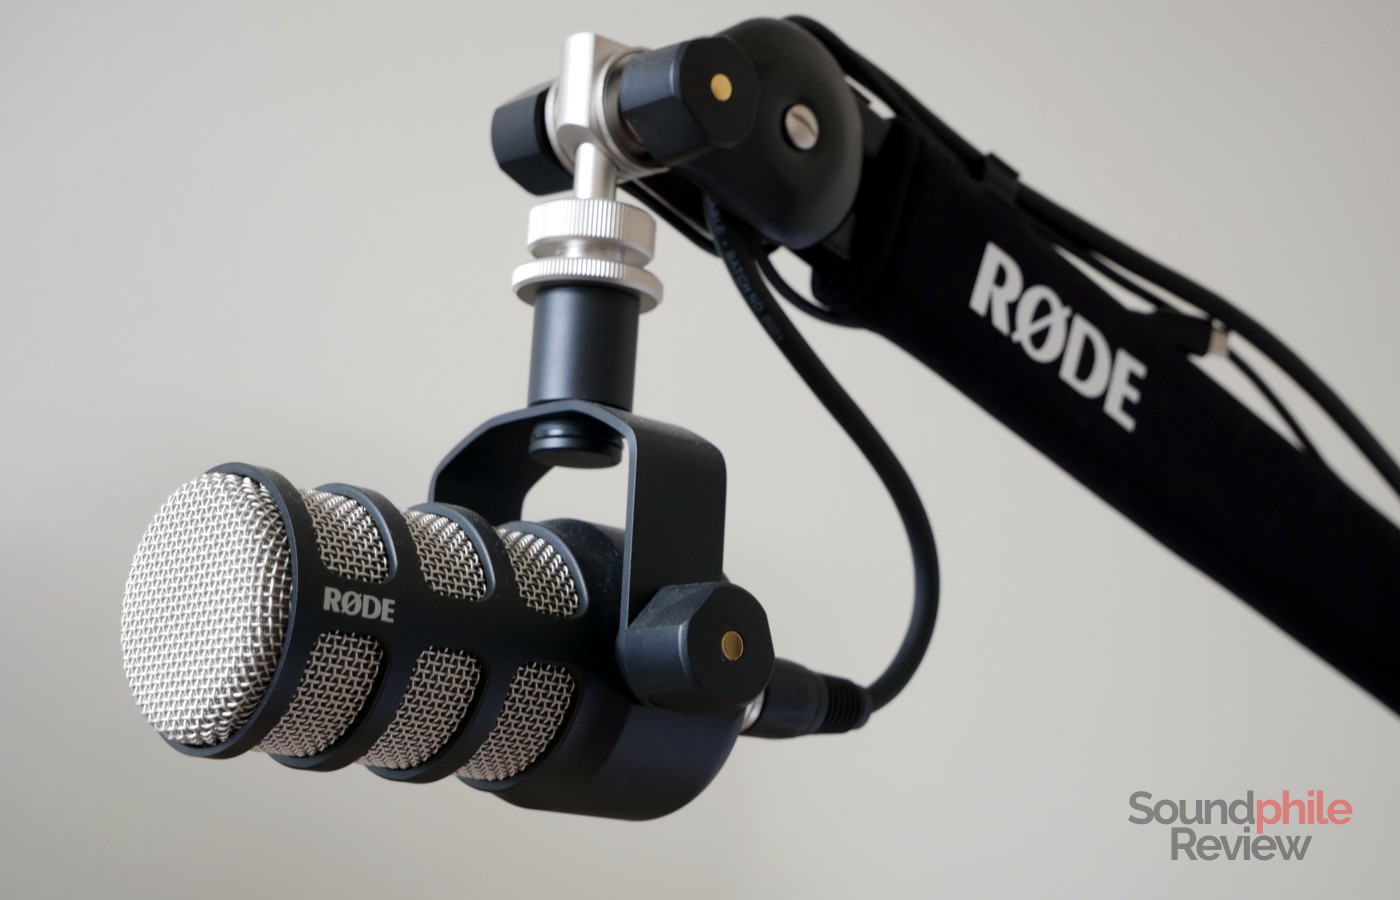 Rode PodMic review: Excellent sound quality at an aggressive